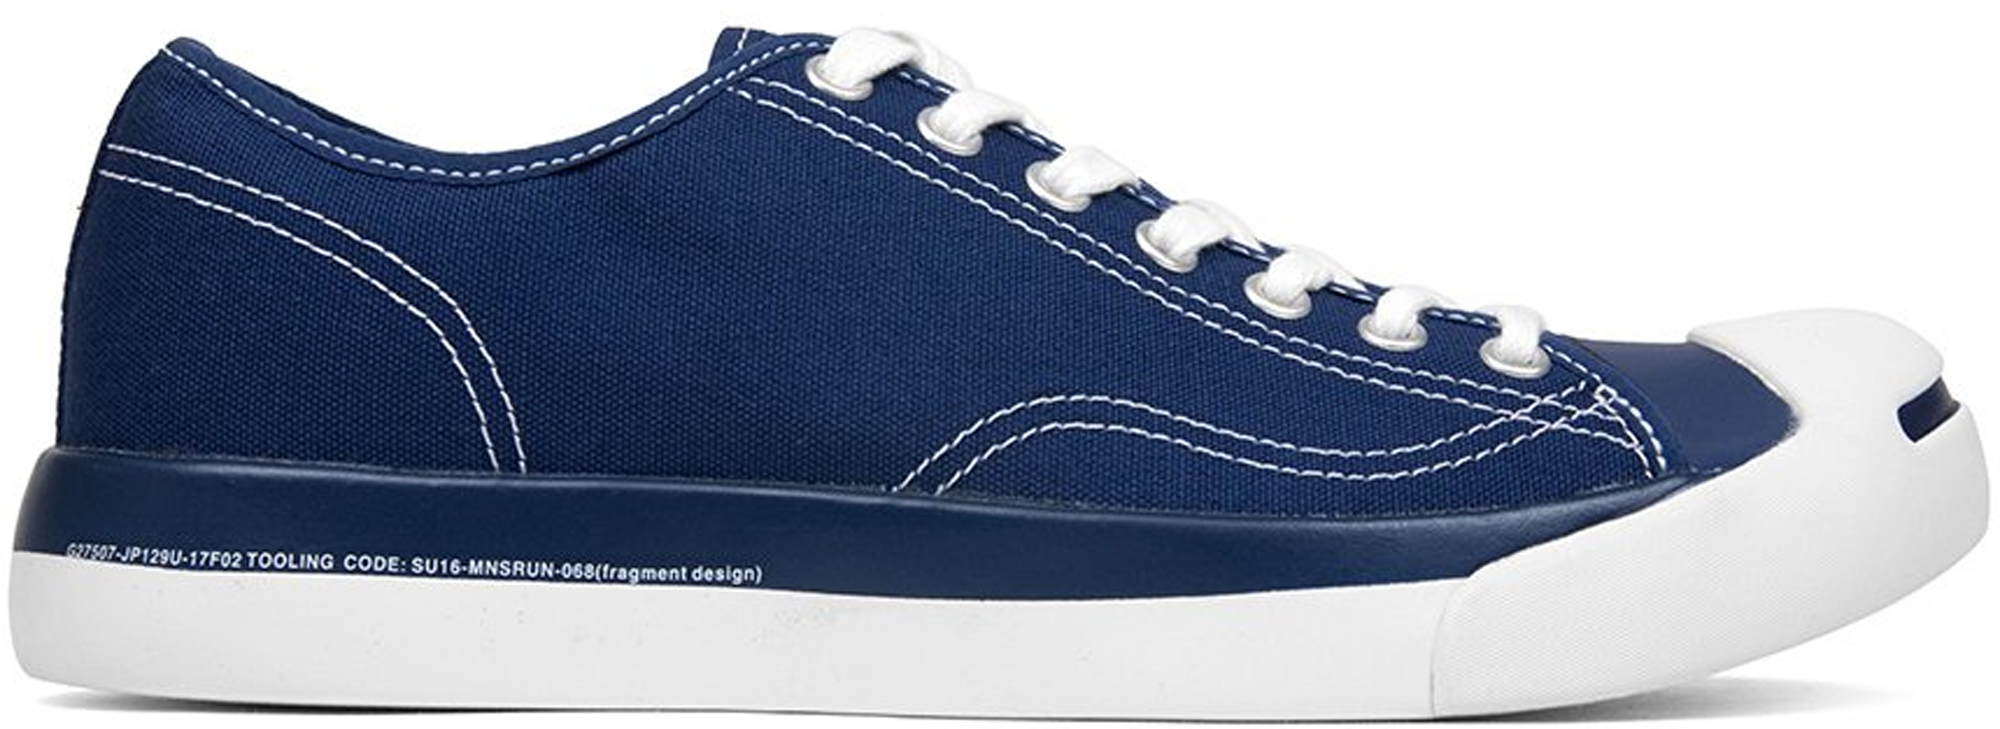 converse jack purcell fragment